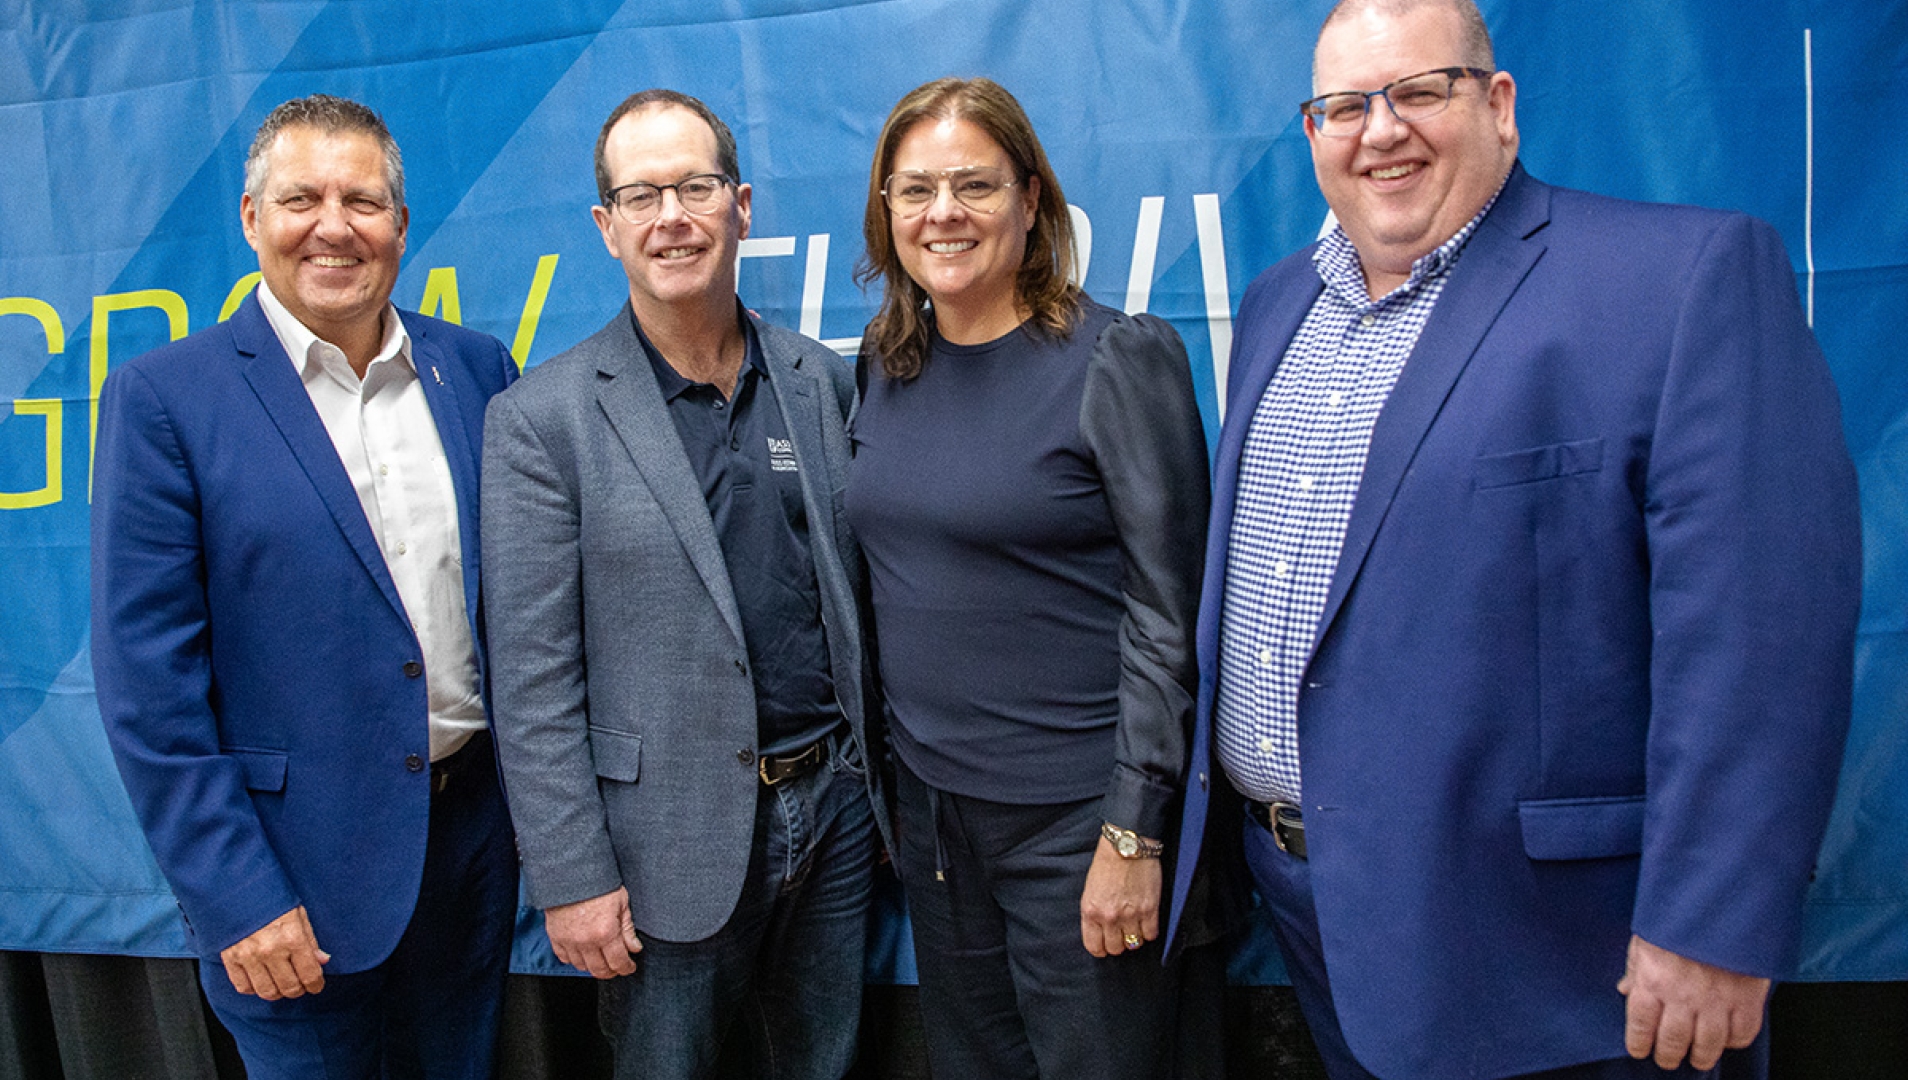 L-R (standing together in front of a blue backdrop): Honourable Cliff Cullen, Deputy Premier of Manitoba;  Tim Hore, Dean, Russ Edwards School of Agriculture and Environment, Assiniboine; Honourable Heather Stefanson, Premier of Manitoba;  Mark Frison, President, Assiniboine 